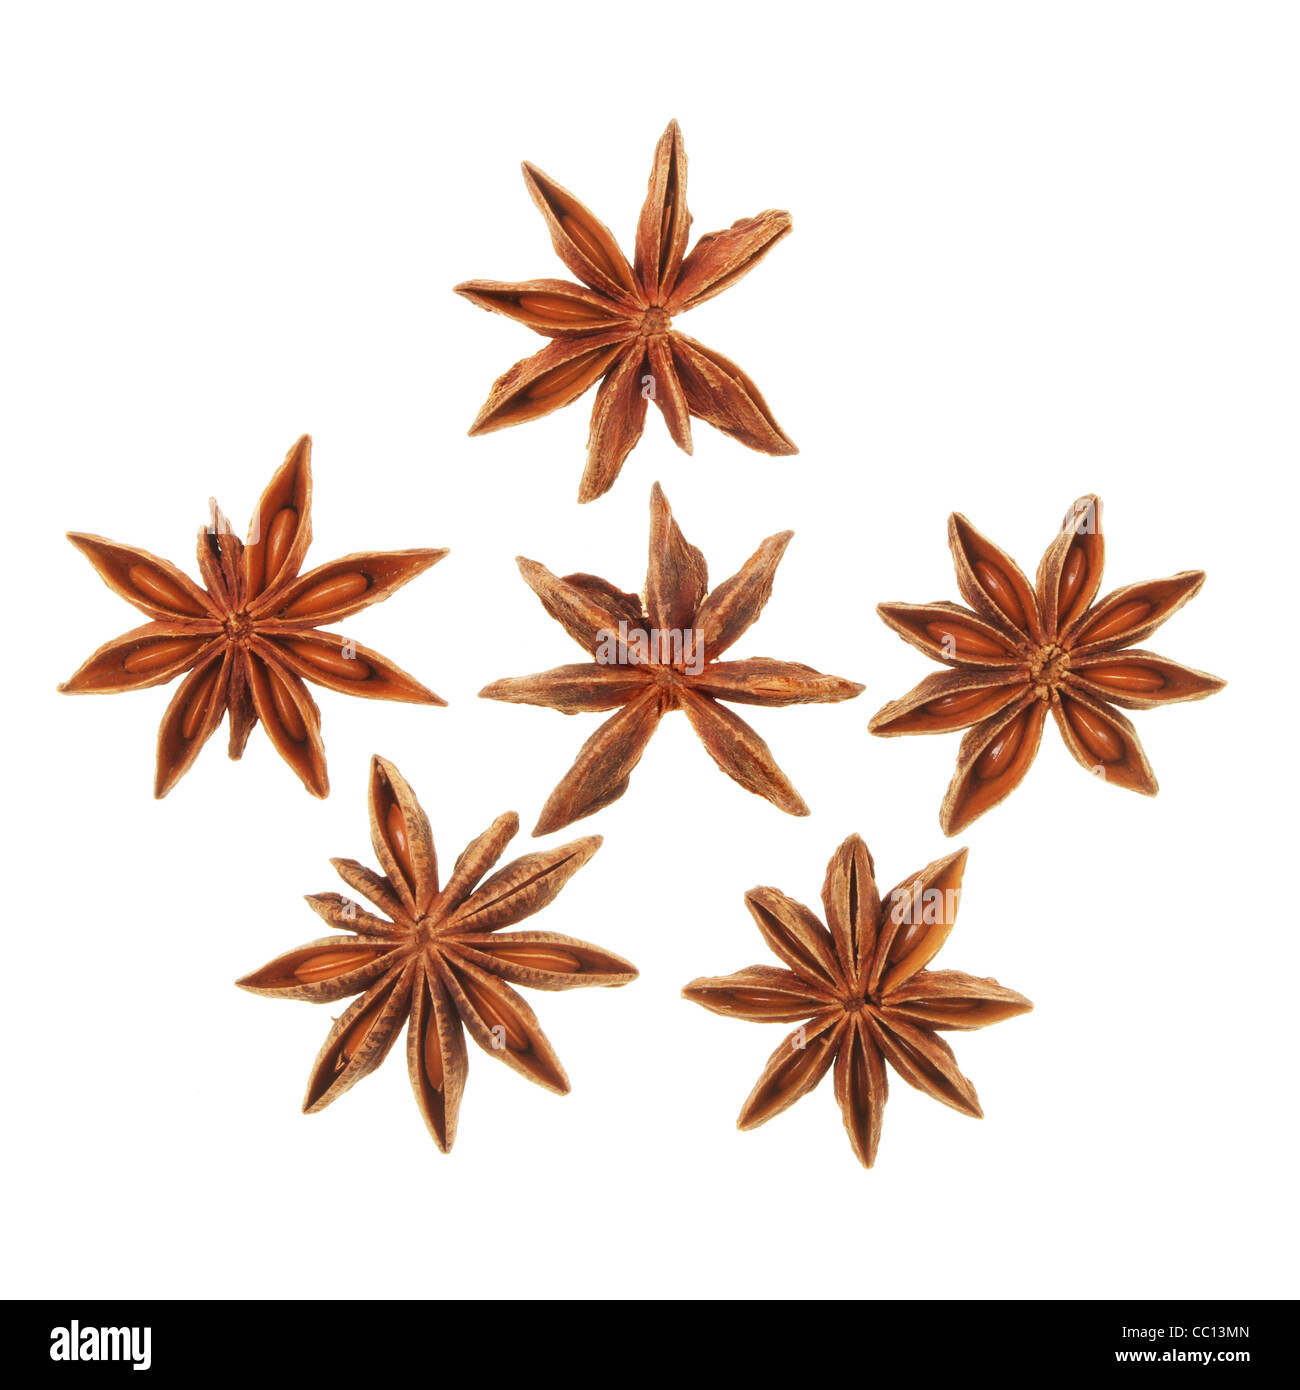 Star anise seed spice seed pods in a group isolated against white Stock Photo